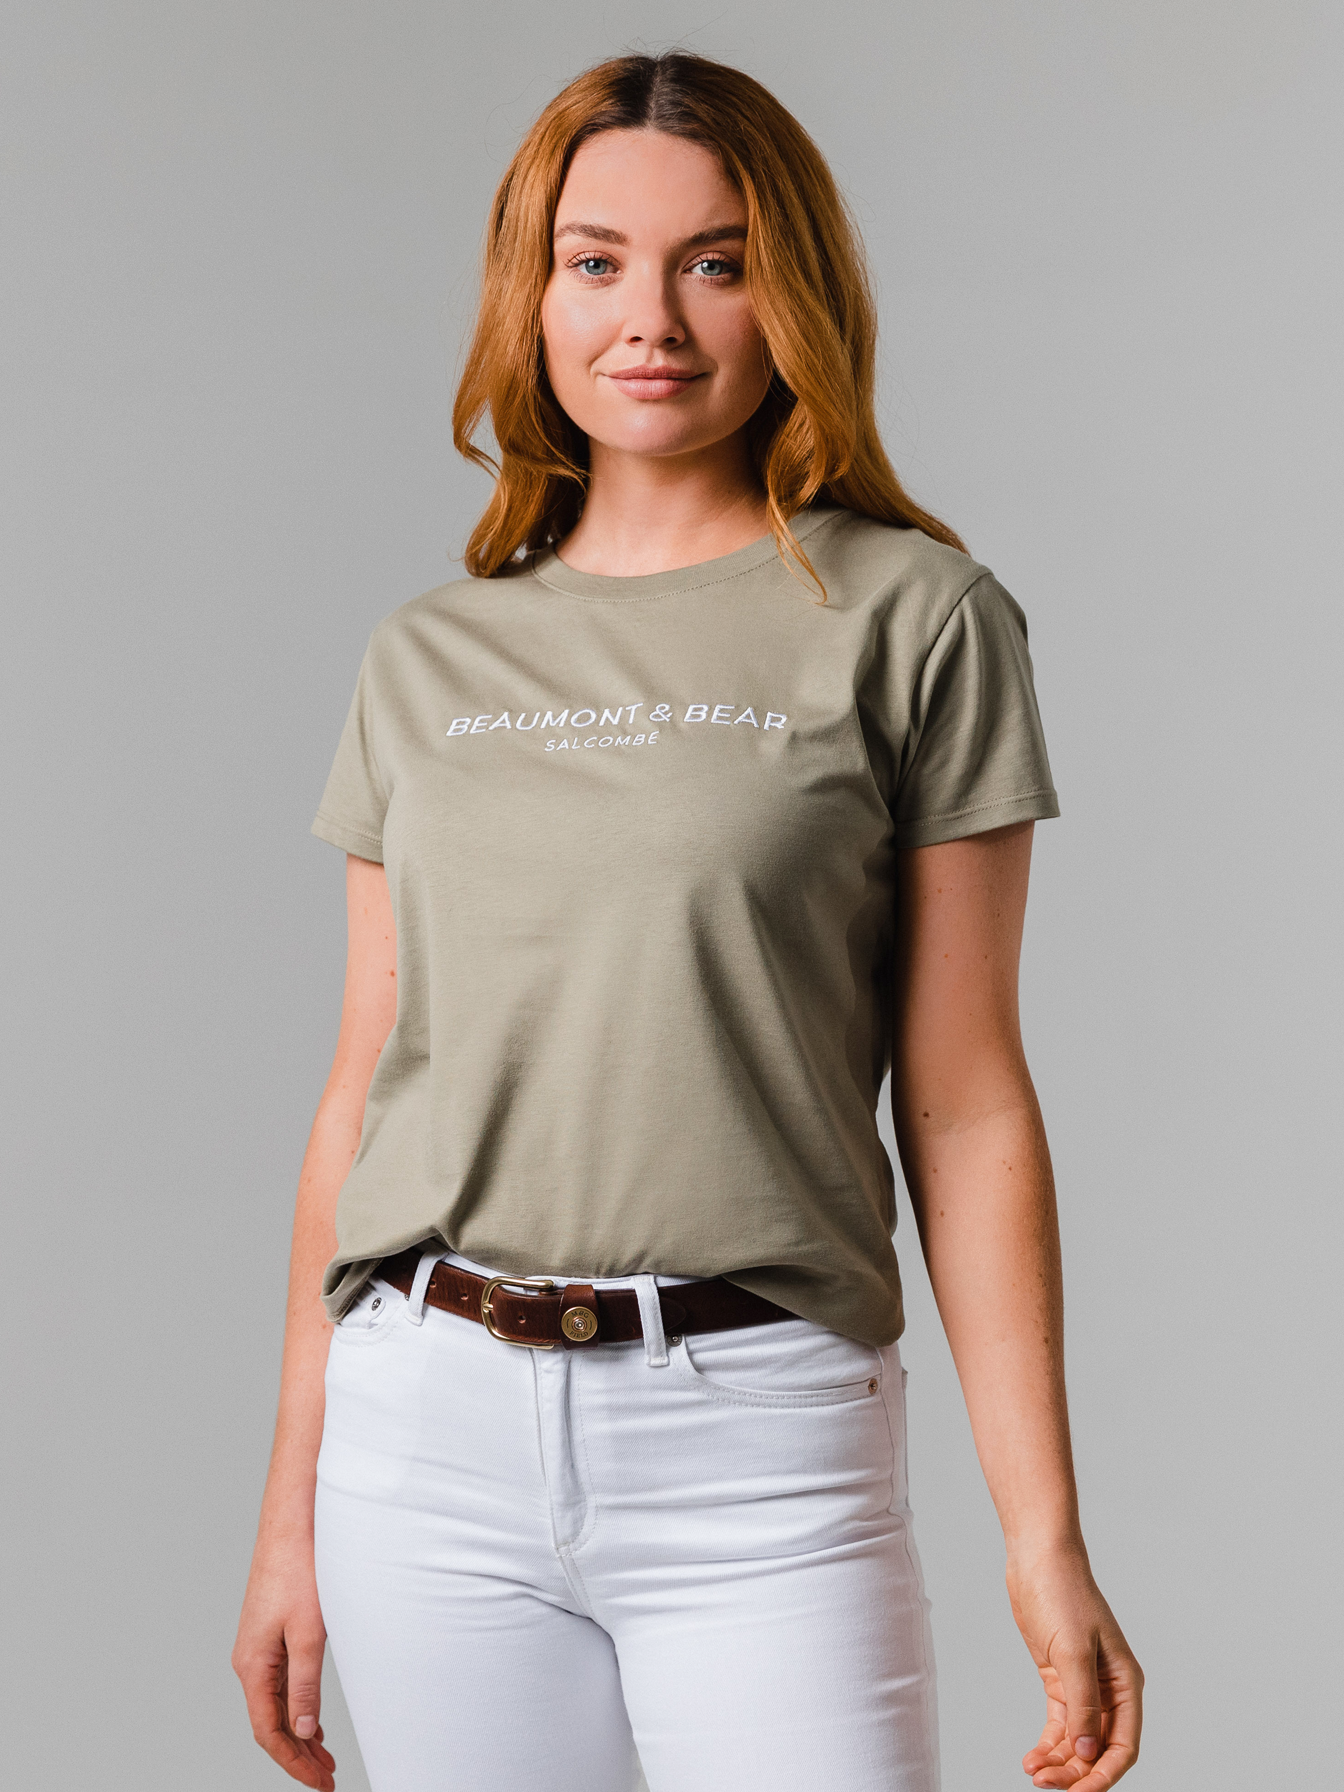 Bolberry T-Shirt - Olive